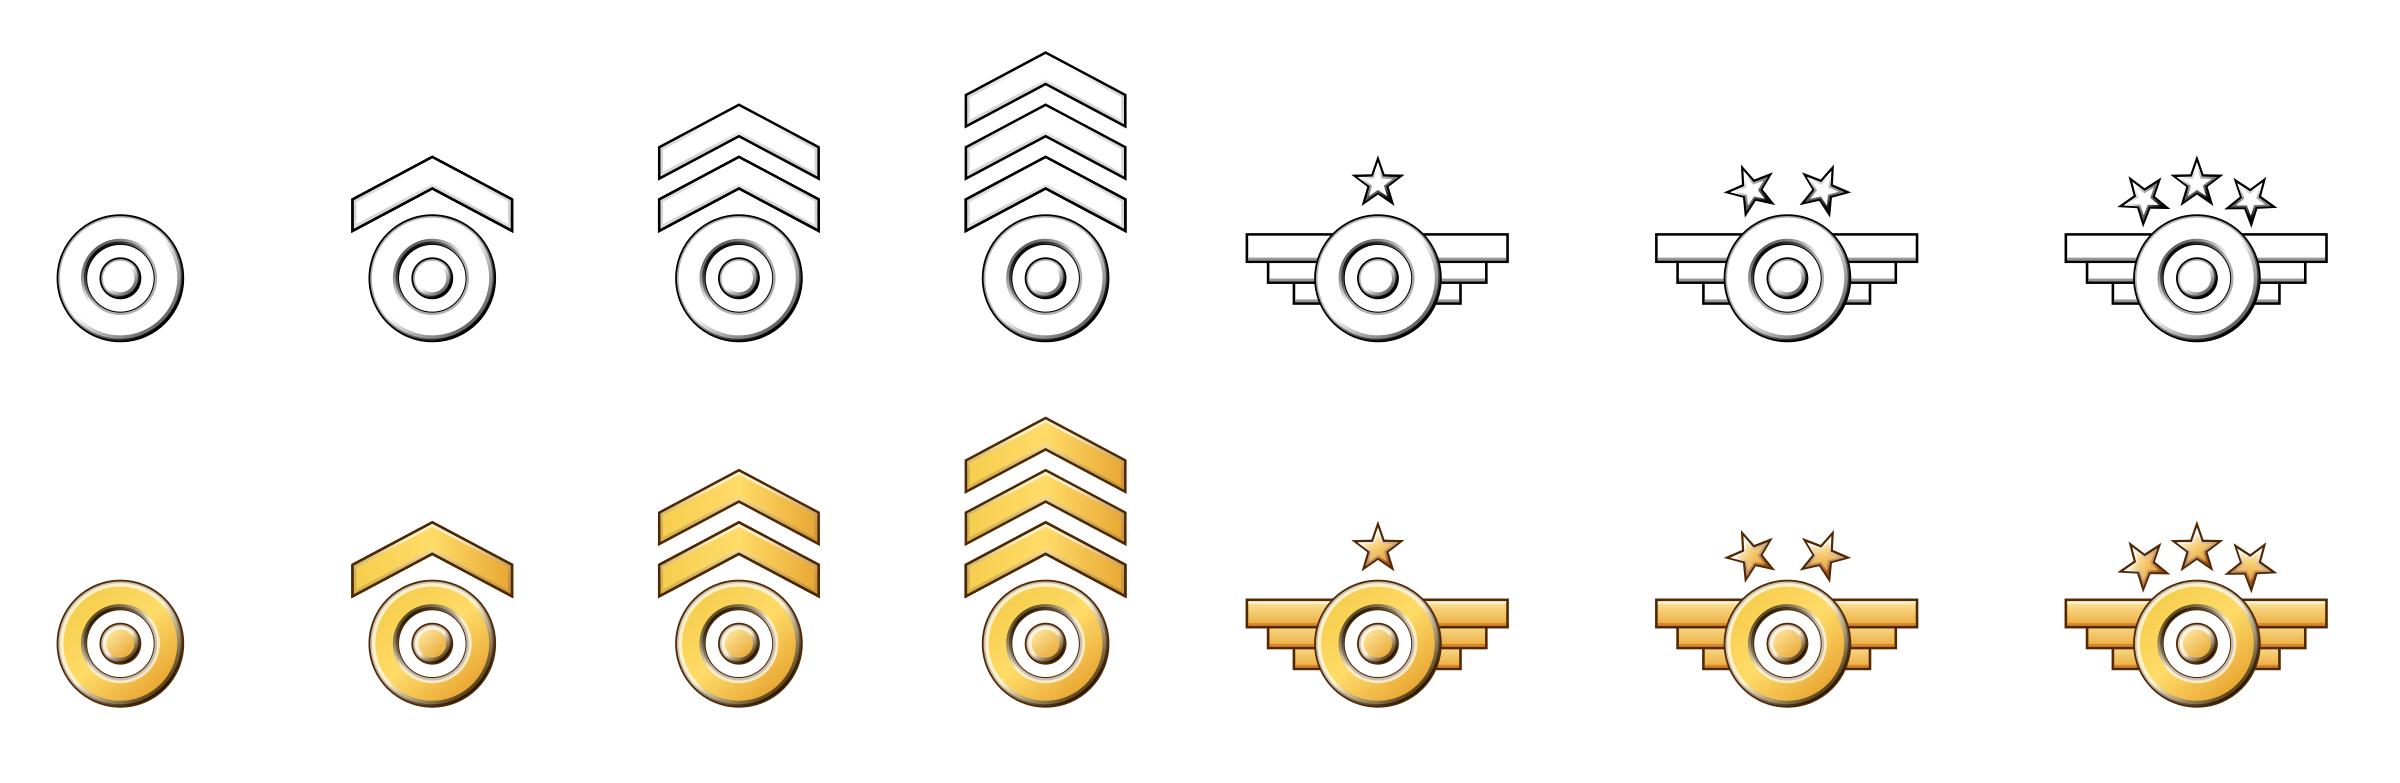 Military Badges PNG icons